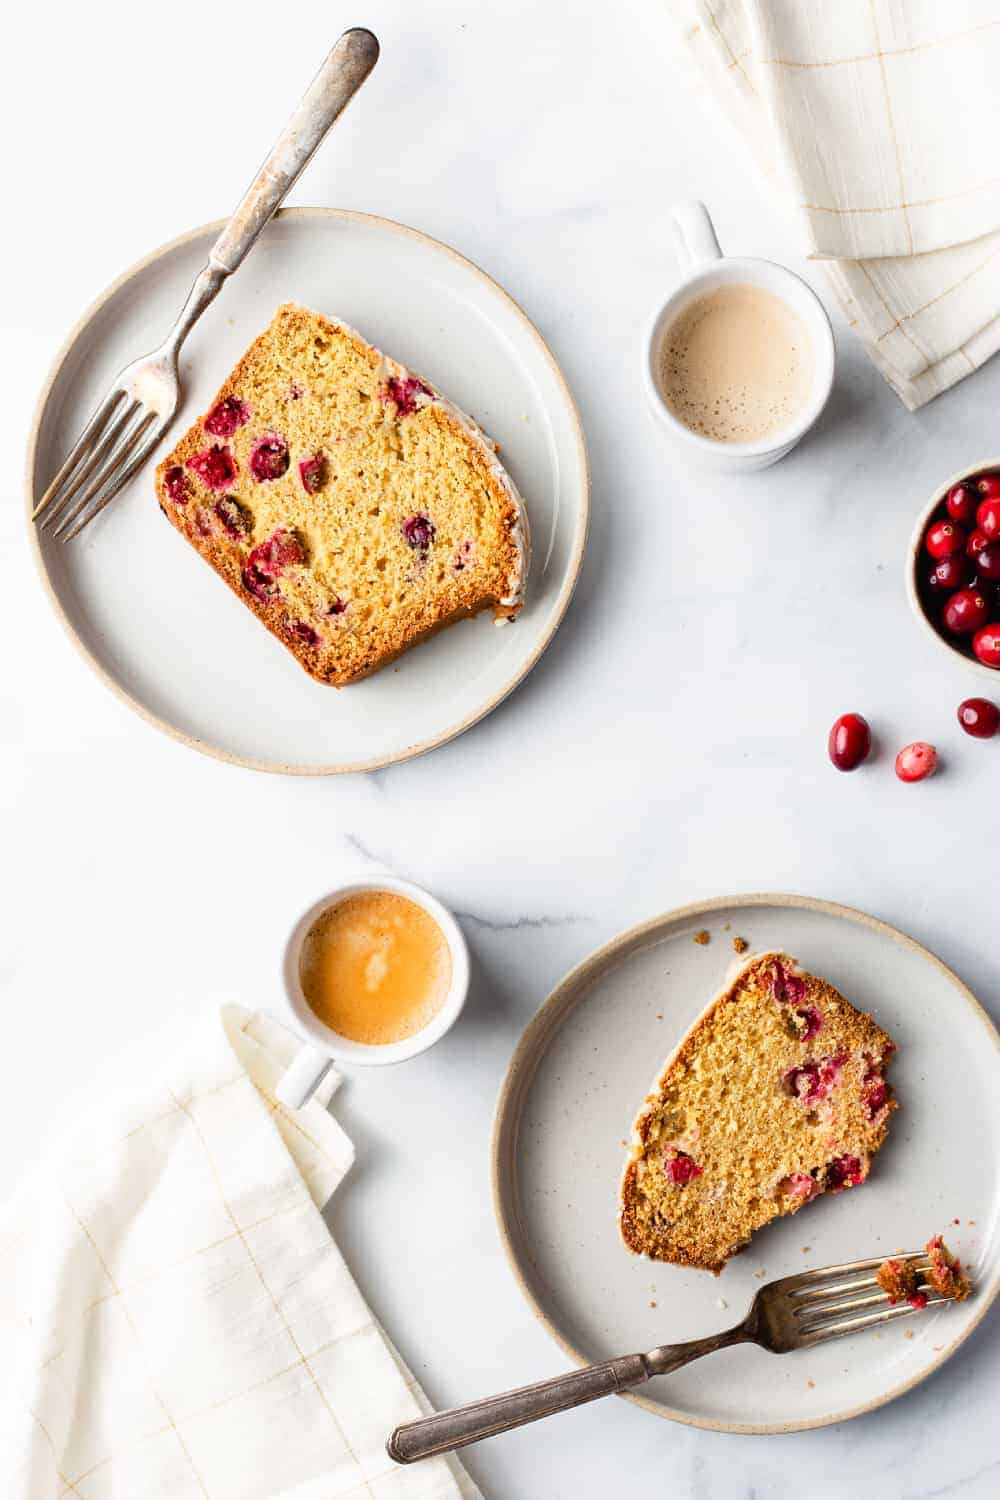 Cranberry Orange Bread is the perfect for the holiday season. Bursting with festive flavor, it's sure to become a new favorite!